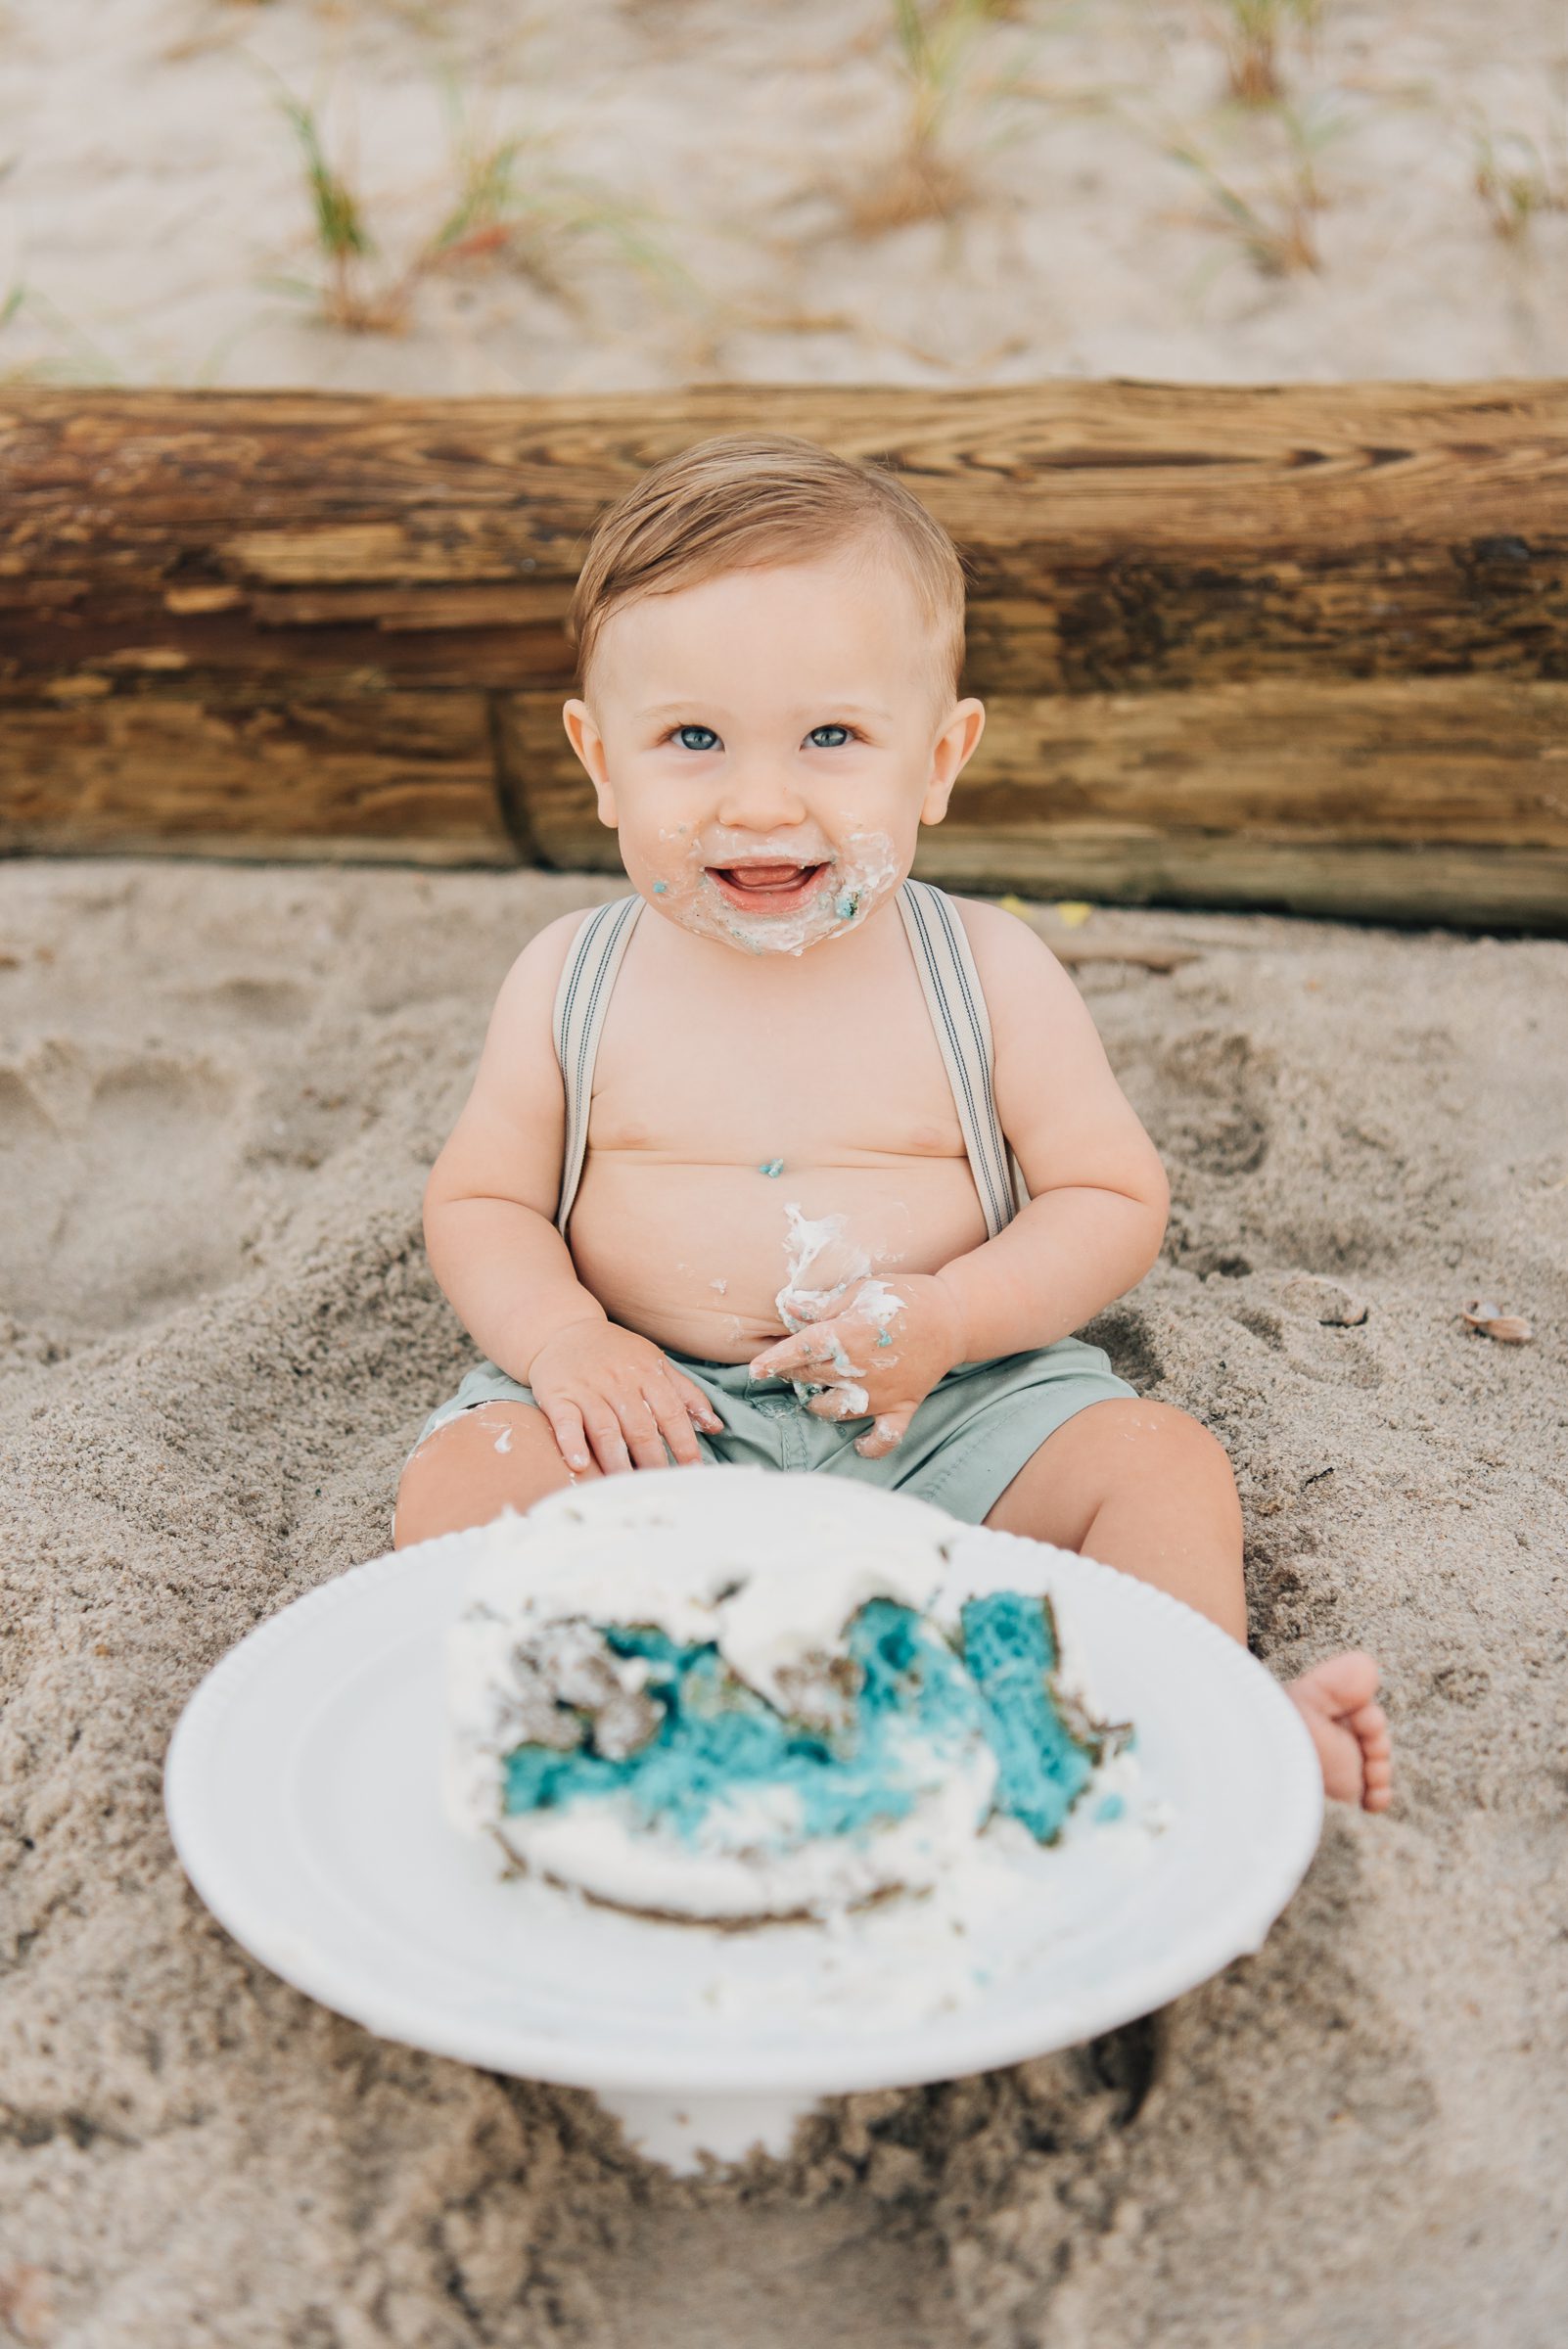 One year old at his first birthday beach cake smash